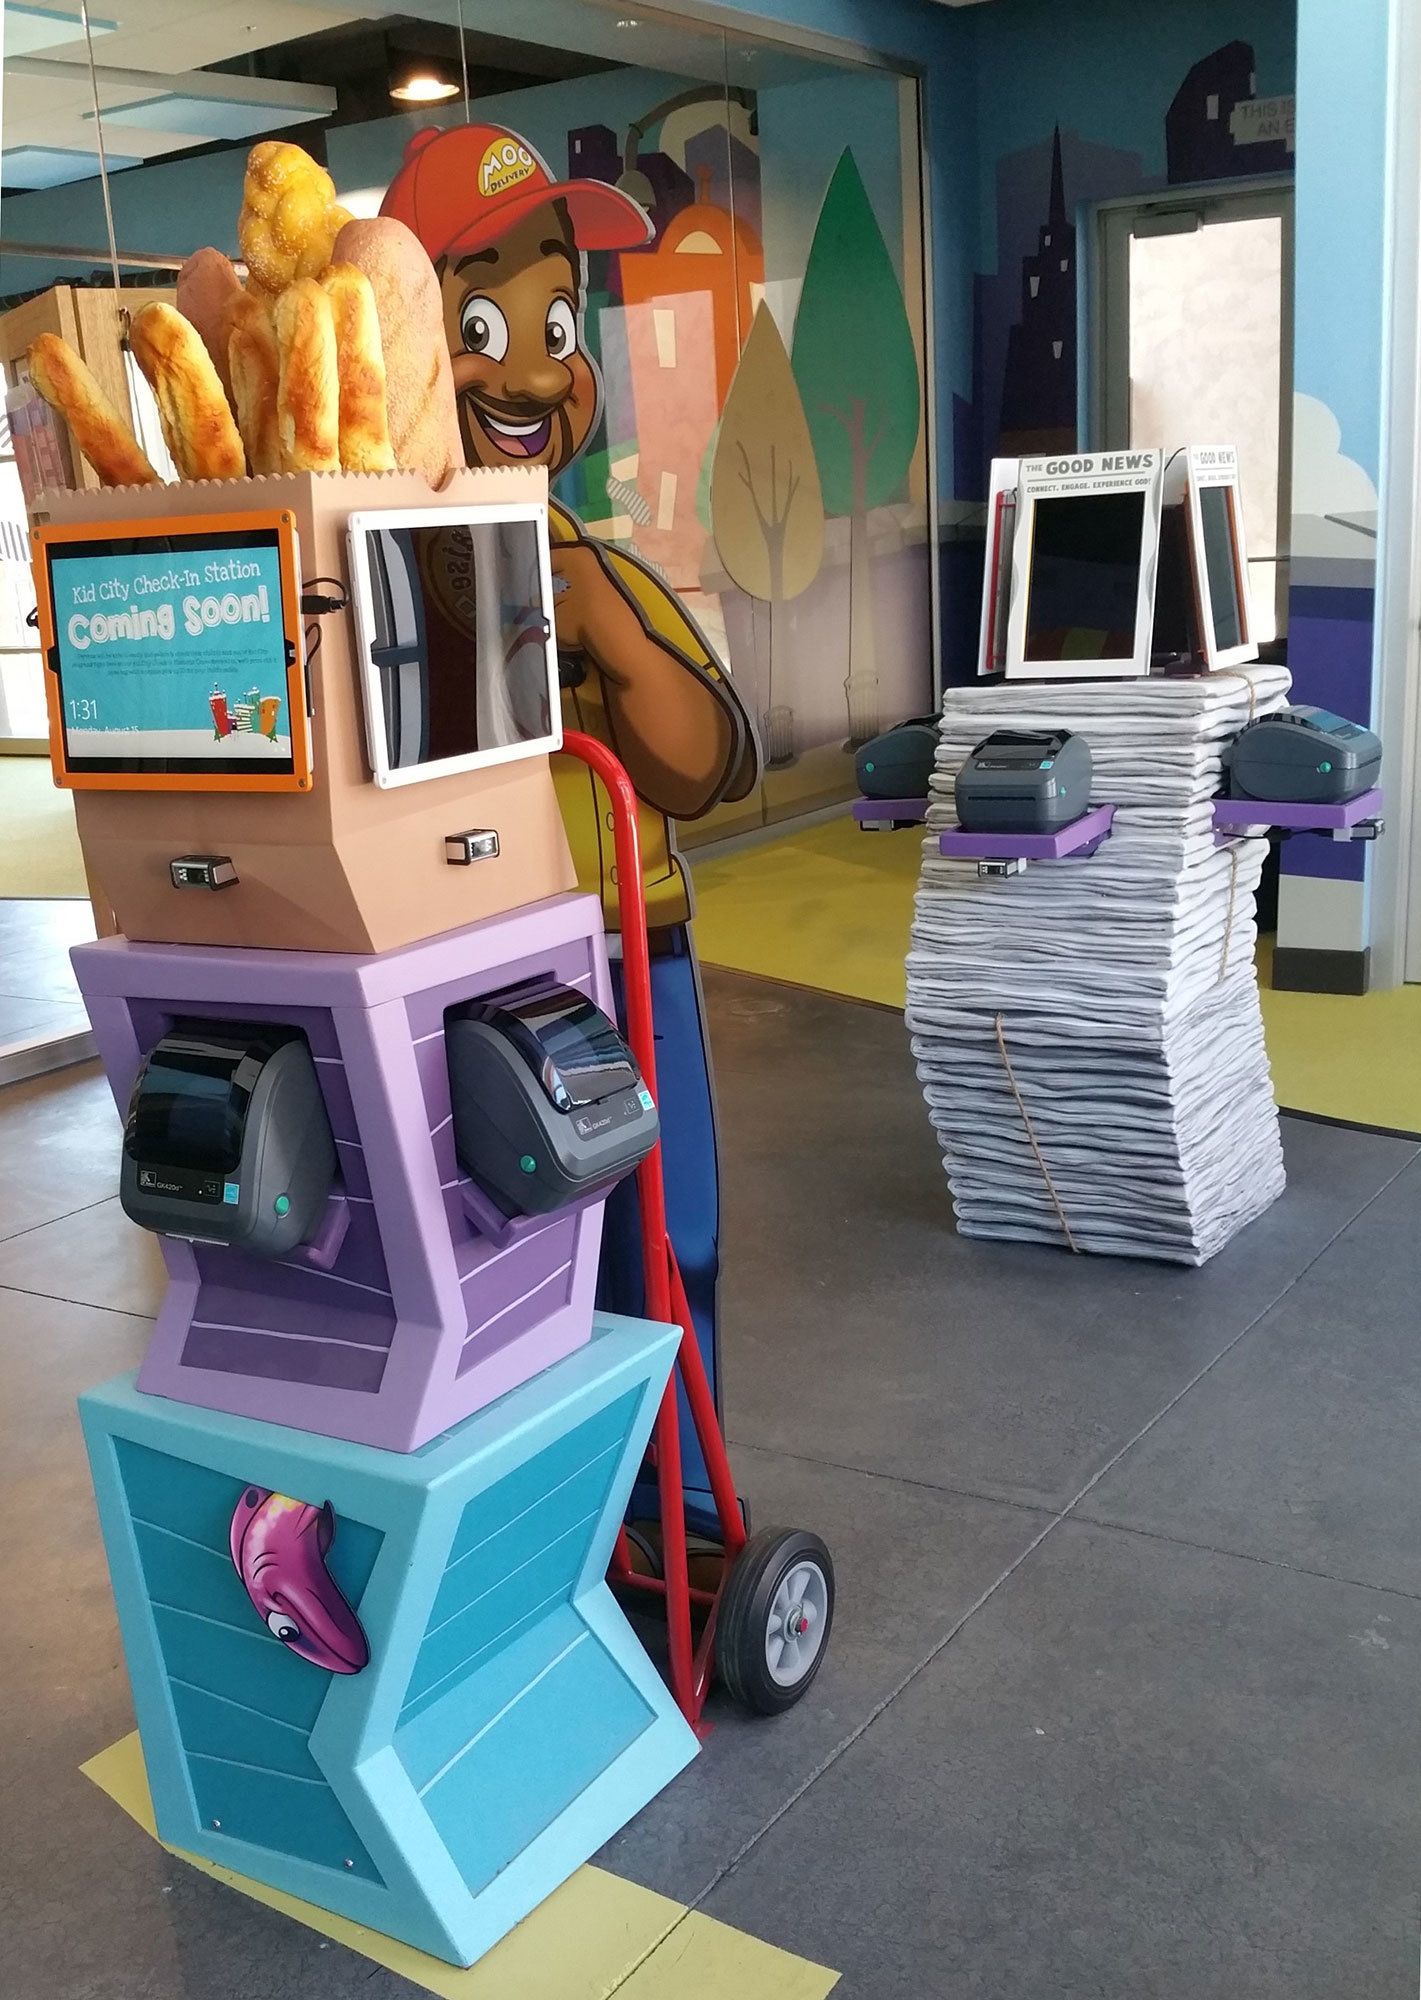 2D cut-out Delivery Man and 3D stacked crates 3-station Check-In Kiosk in Big City Toon Town Themed Space at Mount of Olives Church